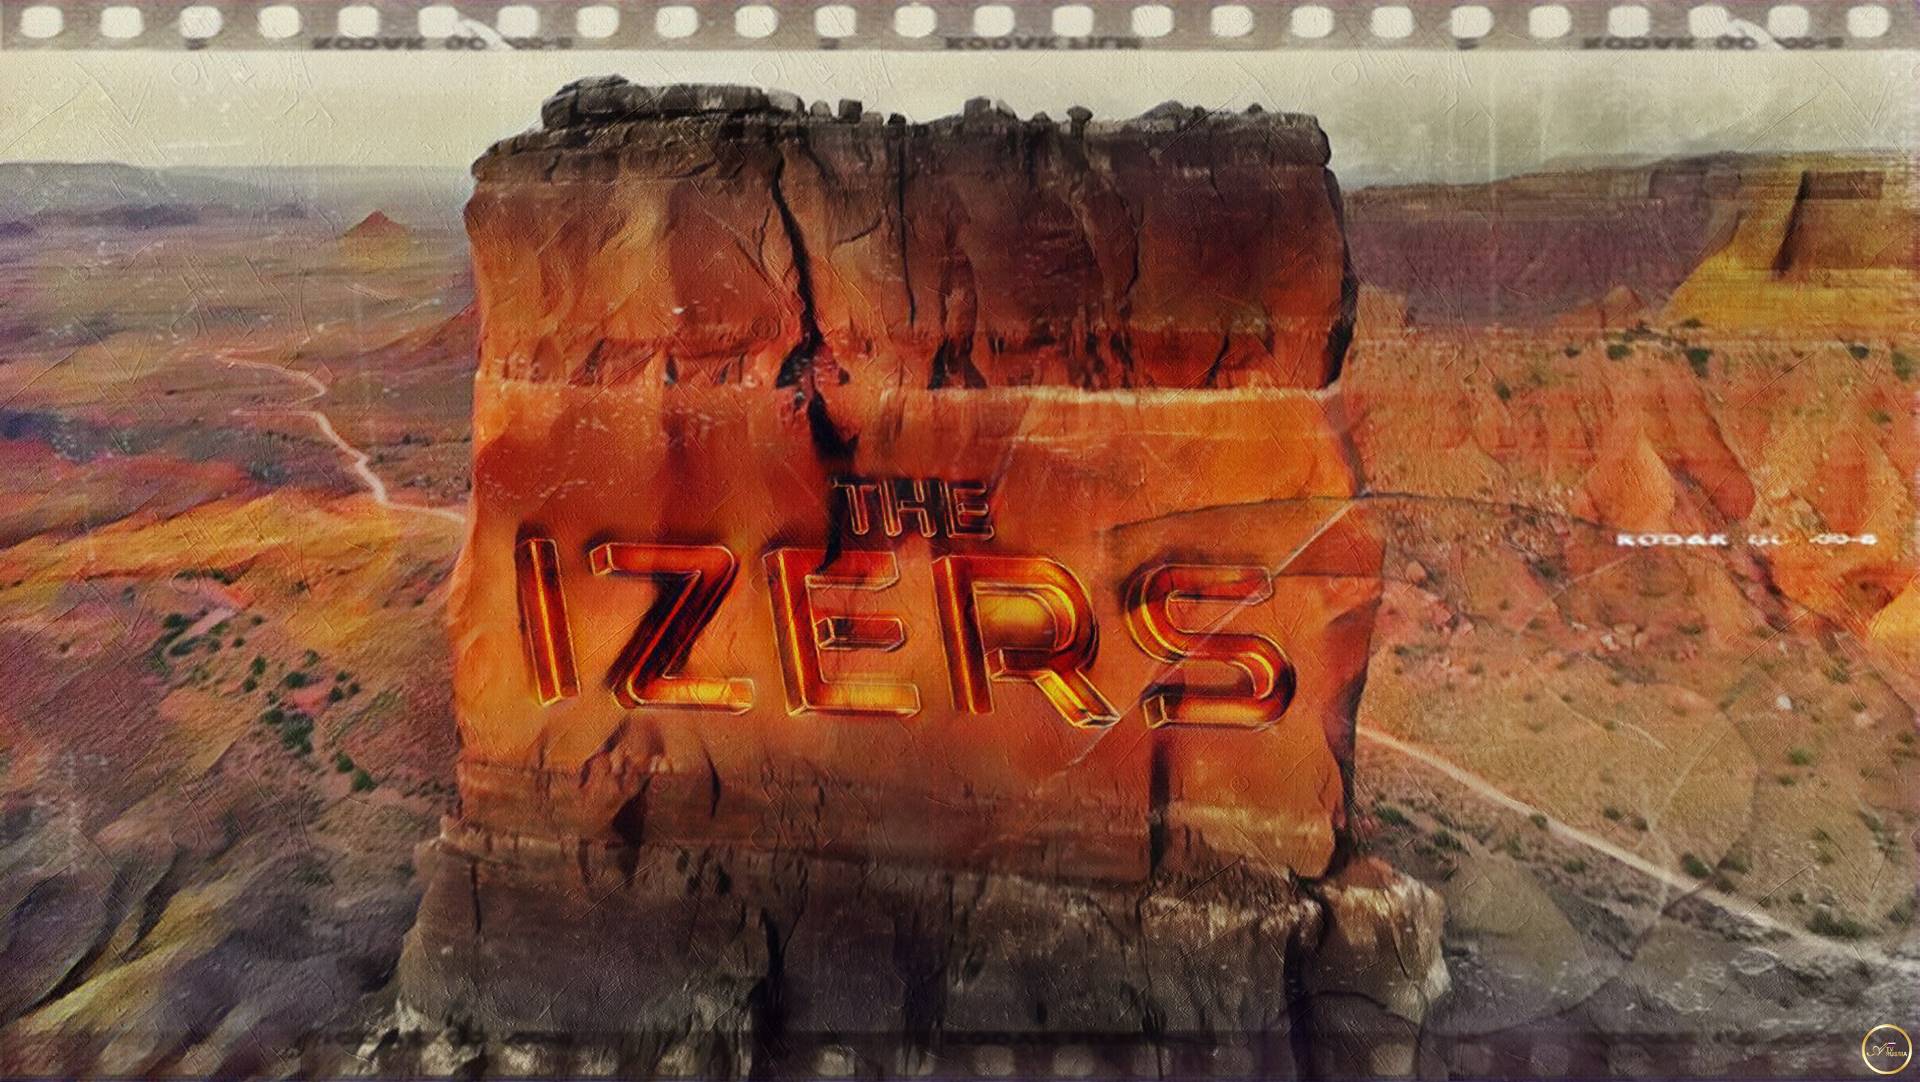 The Izers